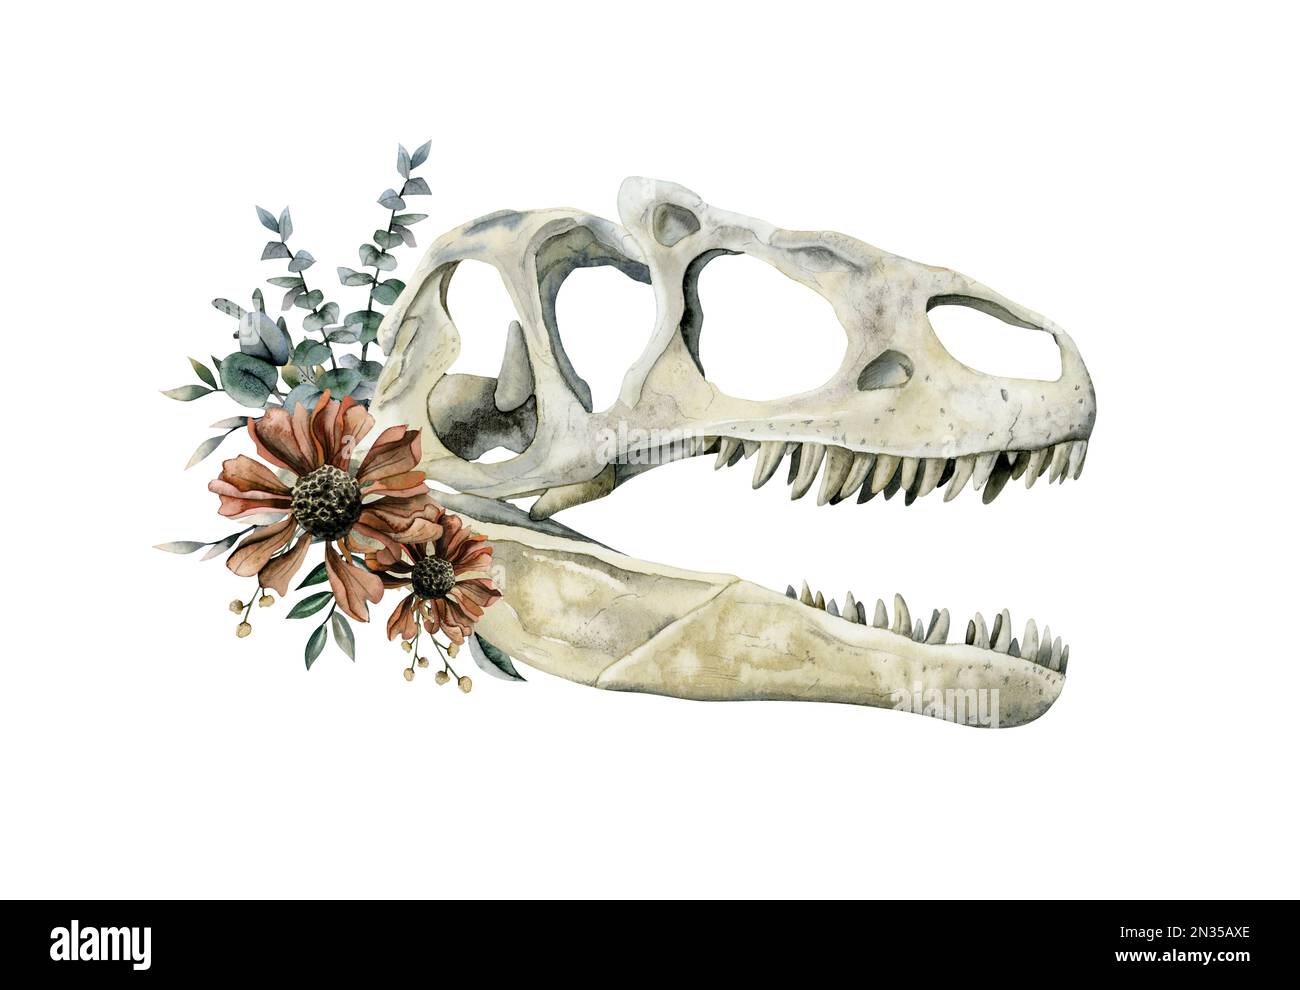 Tyrannosaurus Rex skull with red flowers and eucalyptus branches watercolor illustration isolated on white background. Hand drawn realistic predatory Stock Photo